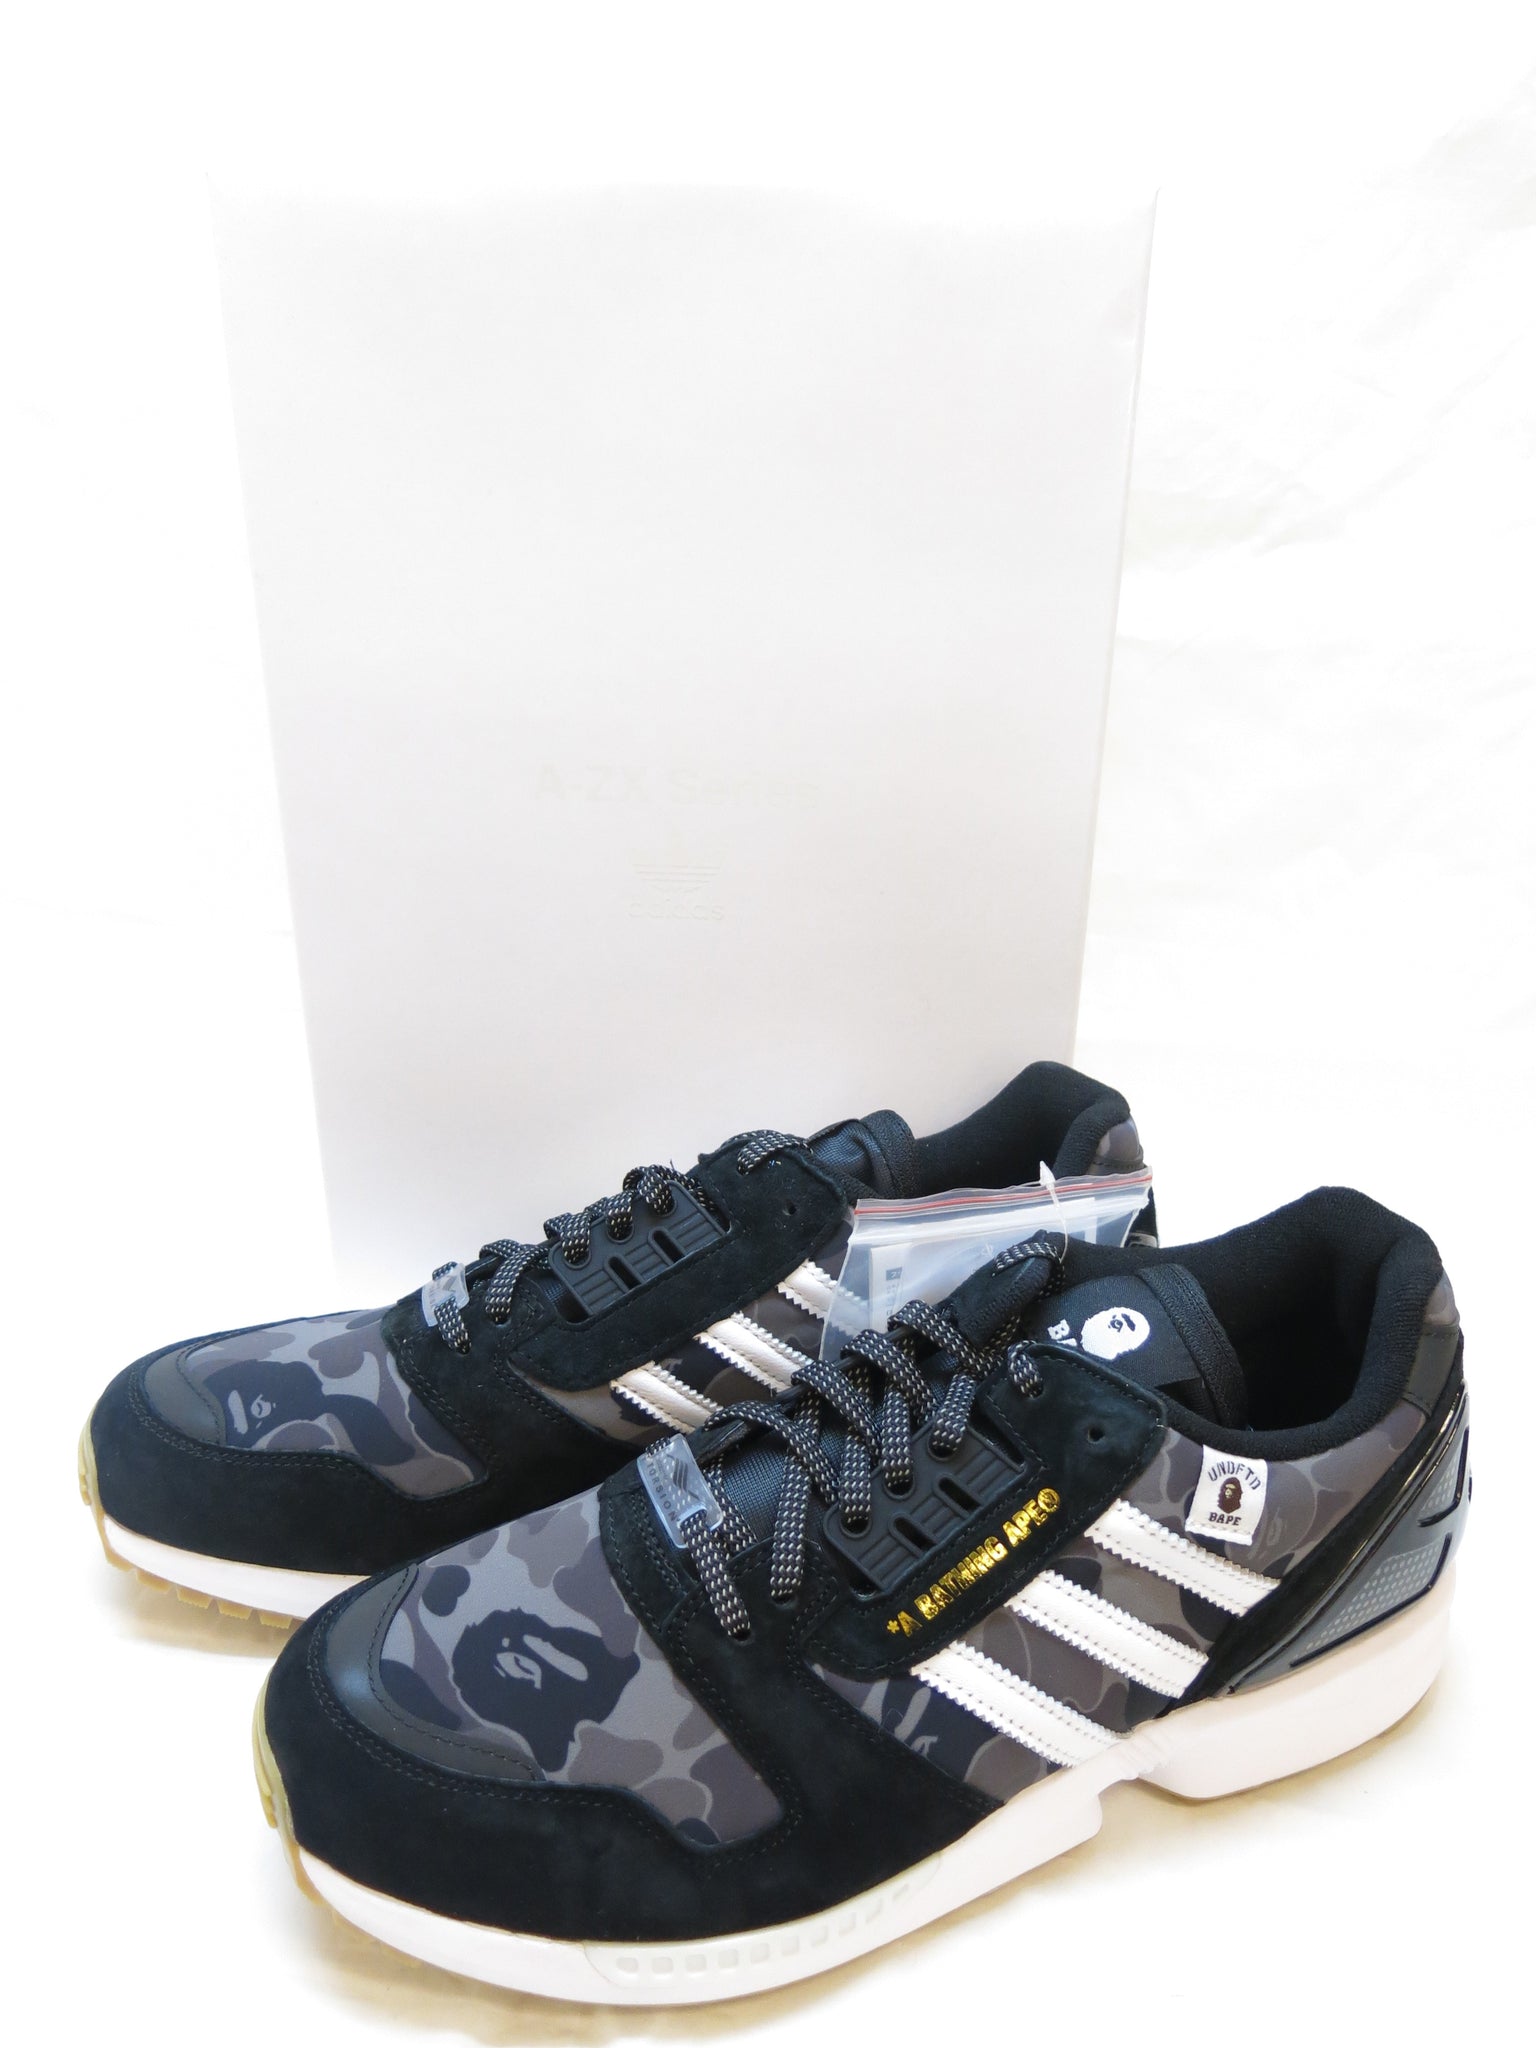 BAPE/A BATHING APE/UNDEFEATED/adidas/ZX 8000/ベイプ/アベイシング